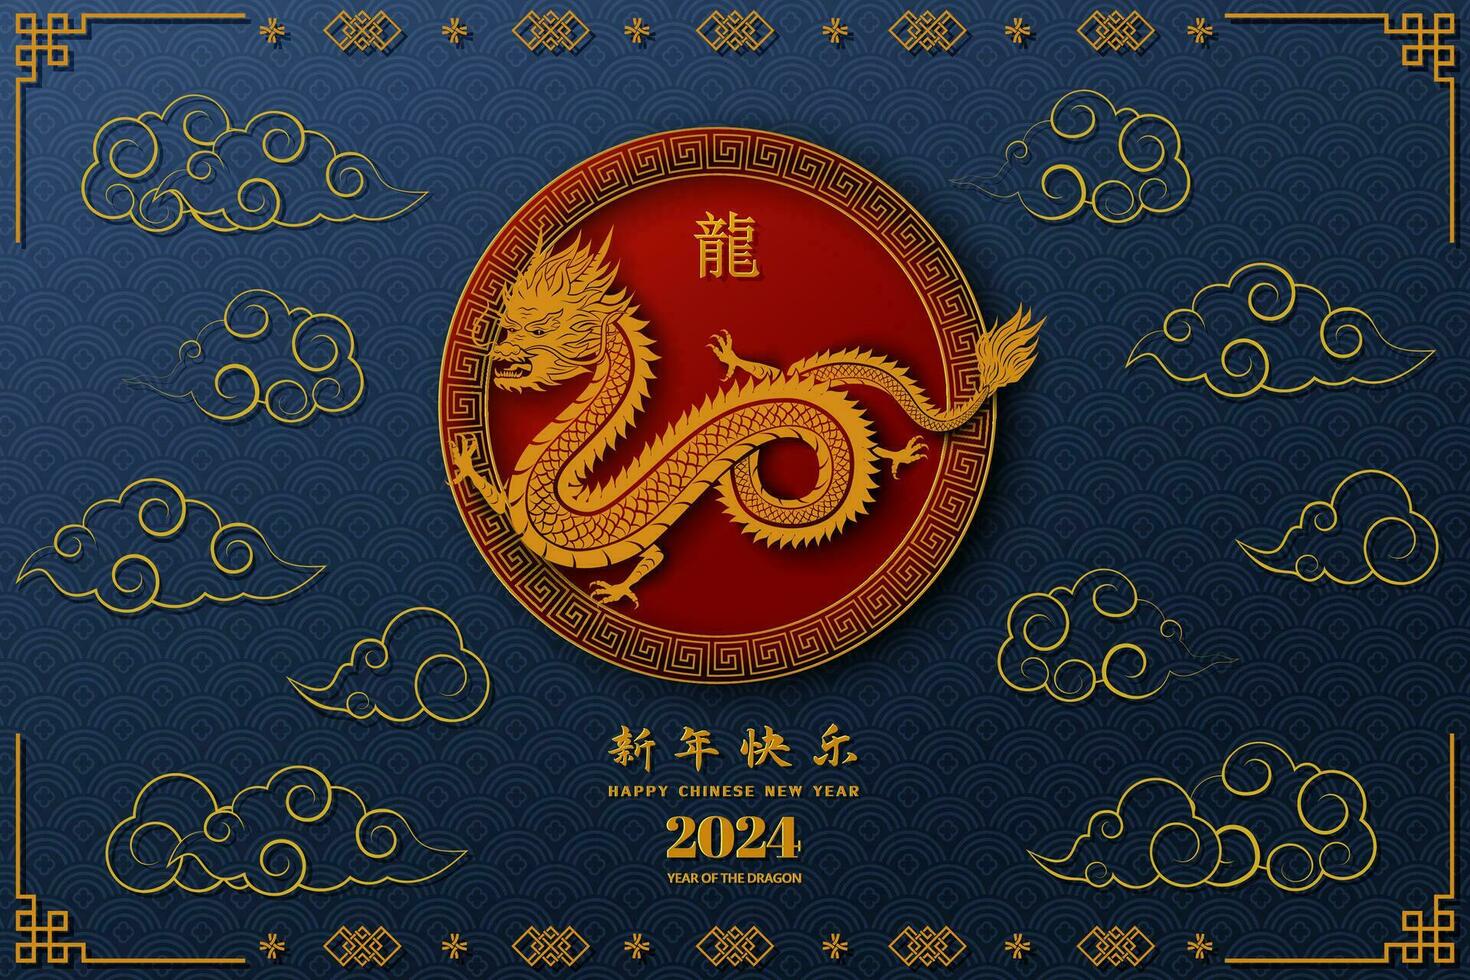 Chinese new year 2024,dragon zodiac sign on asian background,Chinese translate mean happy new year 2024,year of the dragon vector